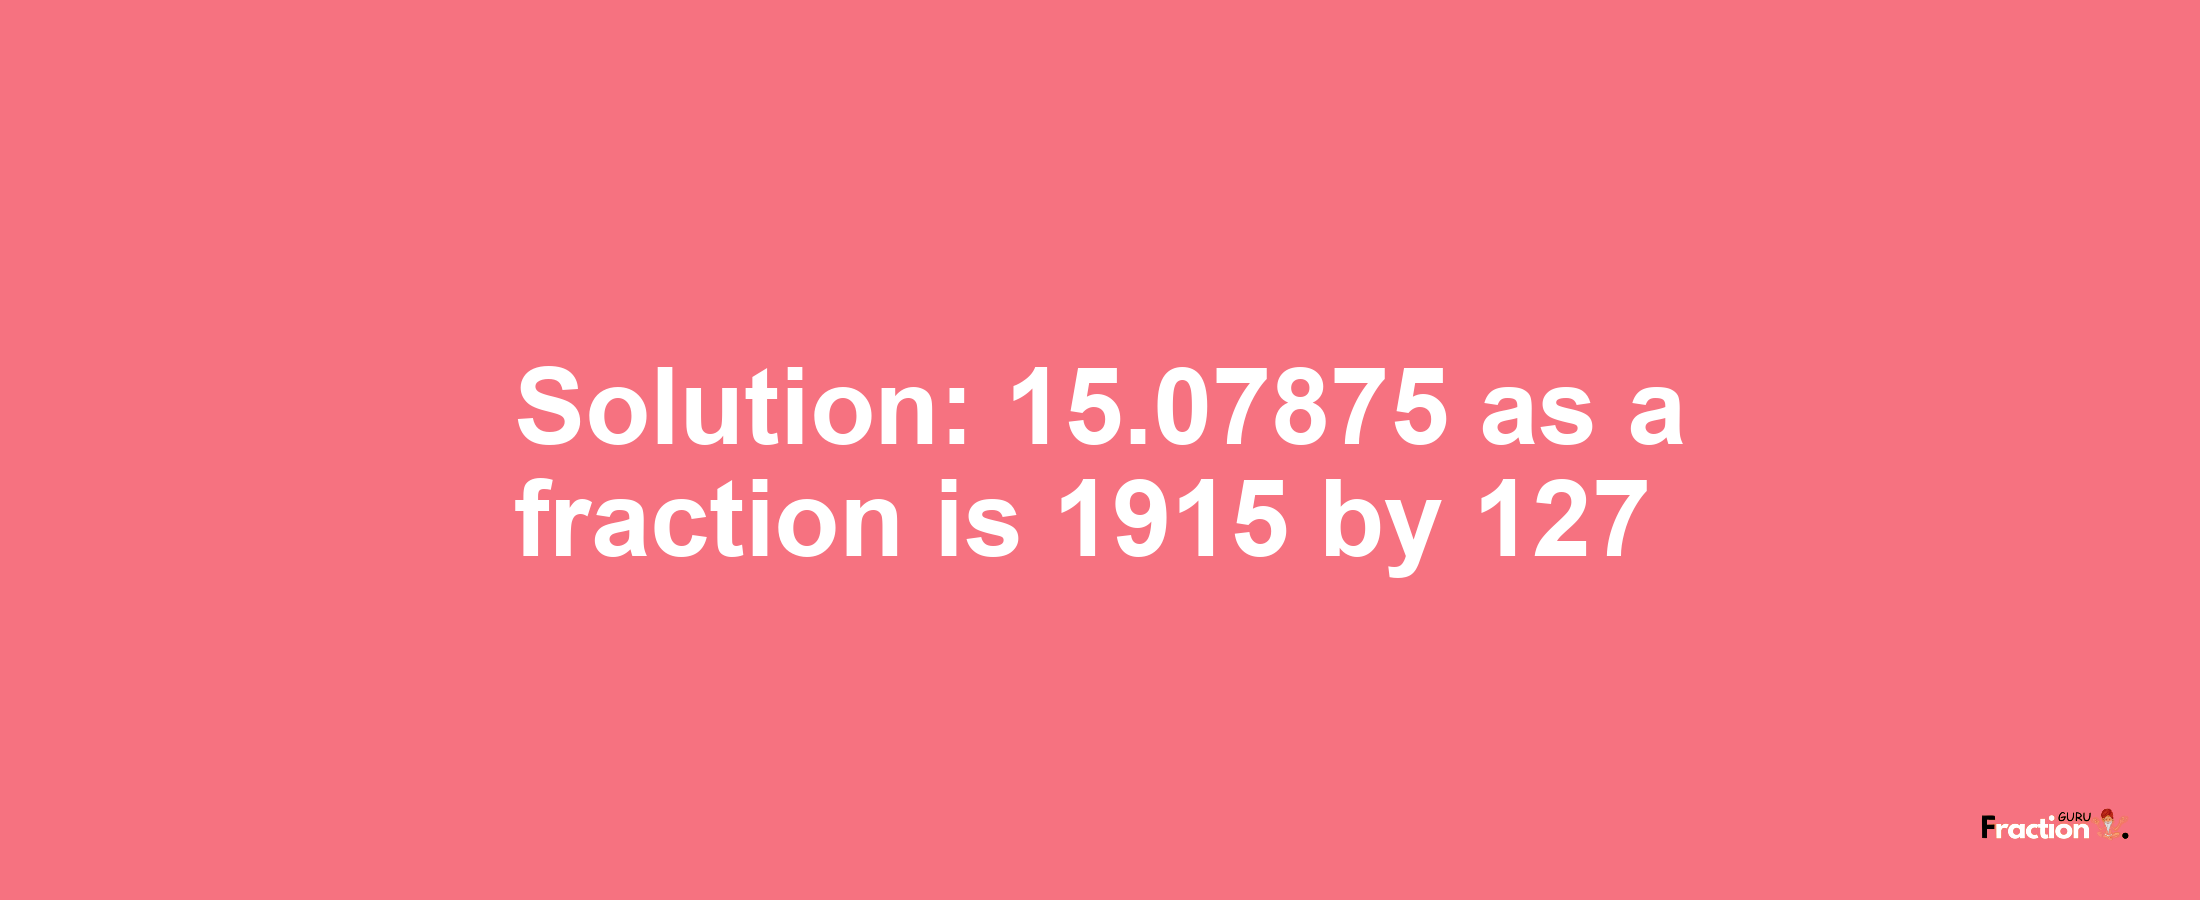 Solution:15.07875 as a fraction is 1915/127